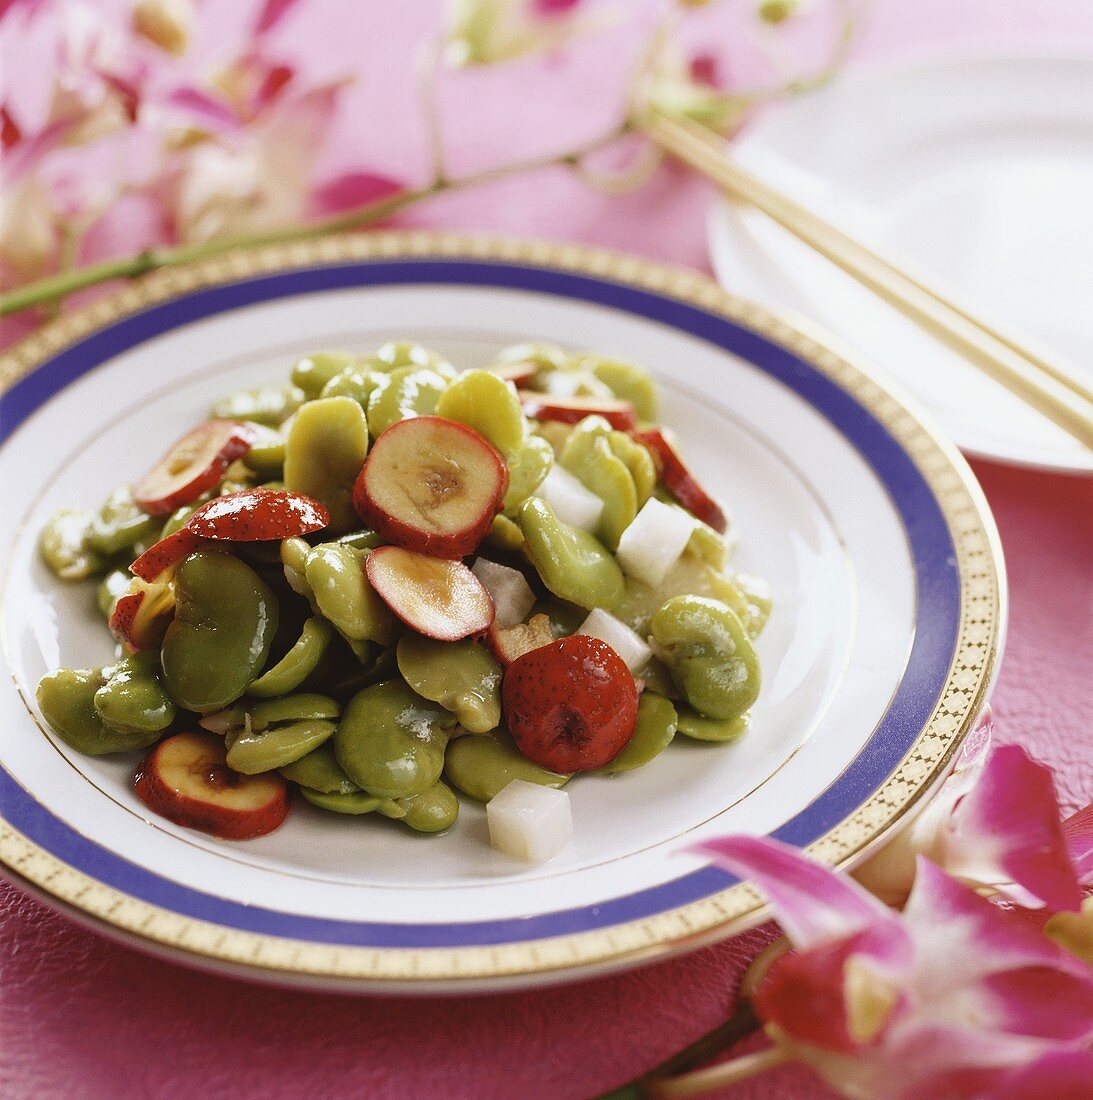 Broad beans with hawthorn and yam